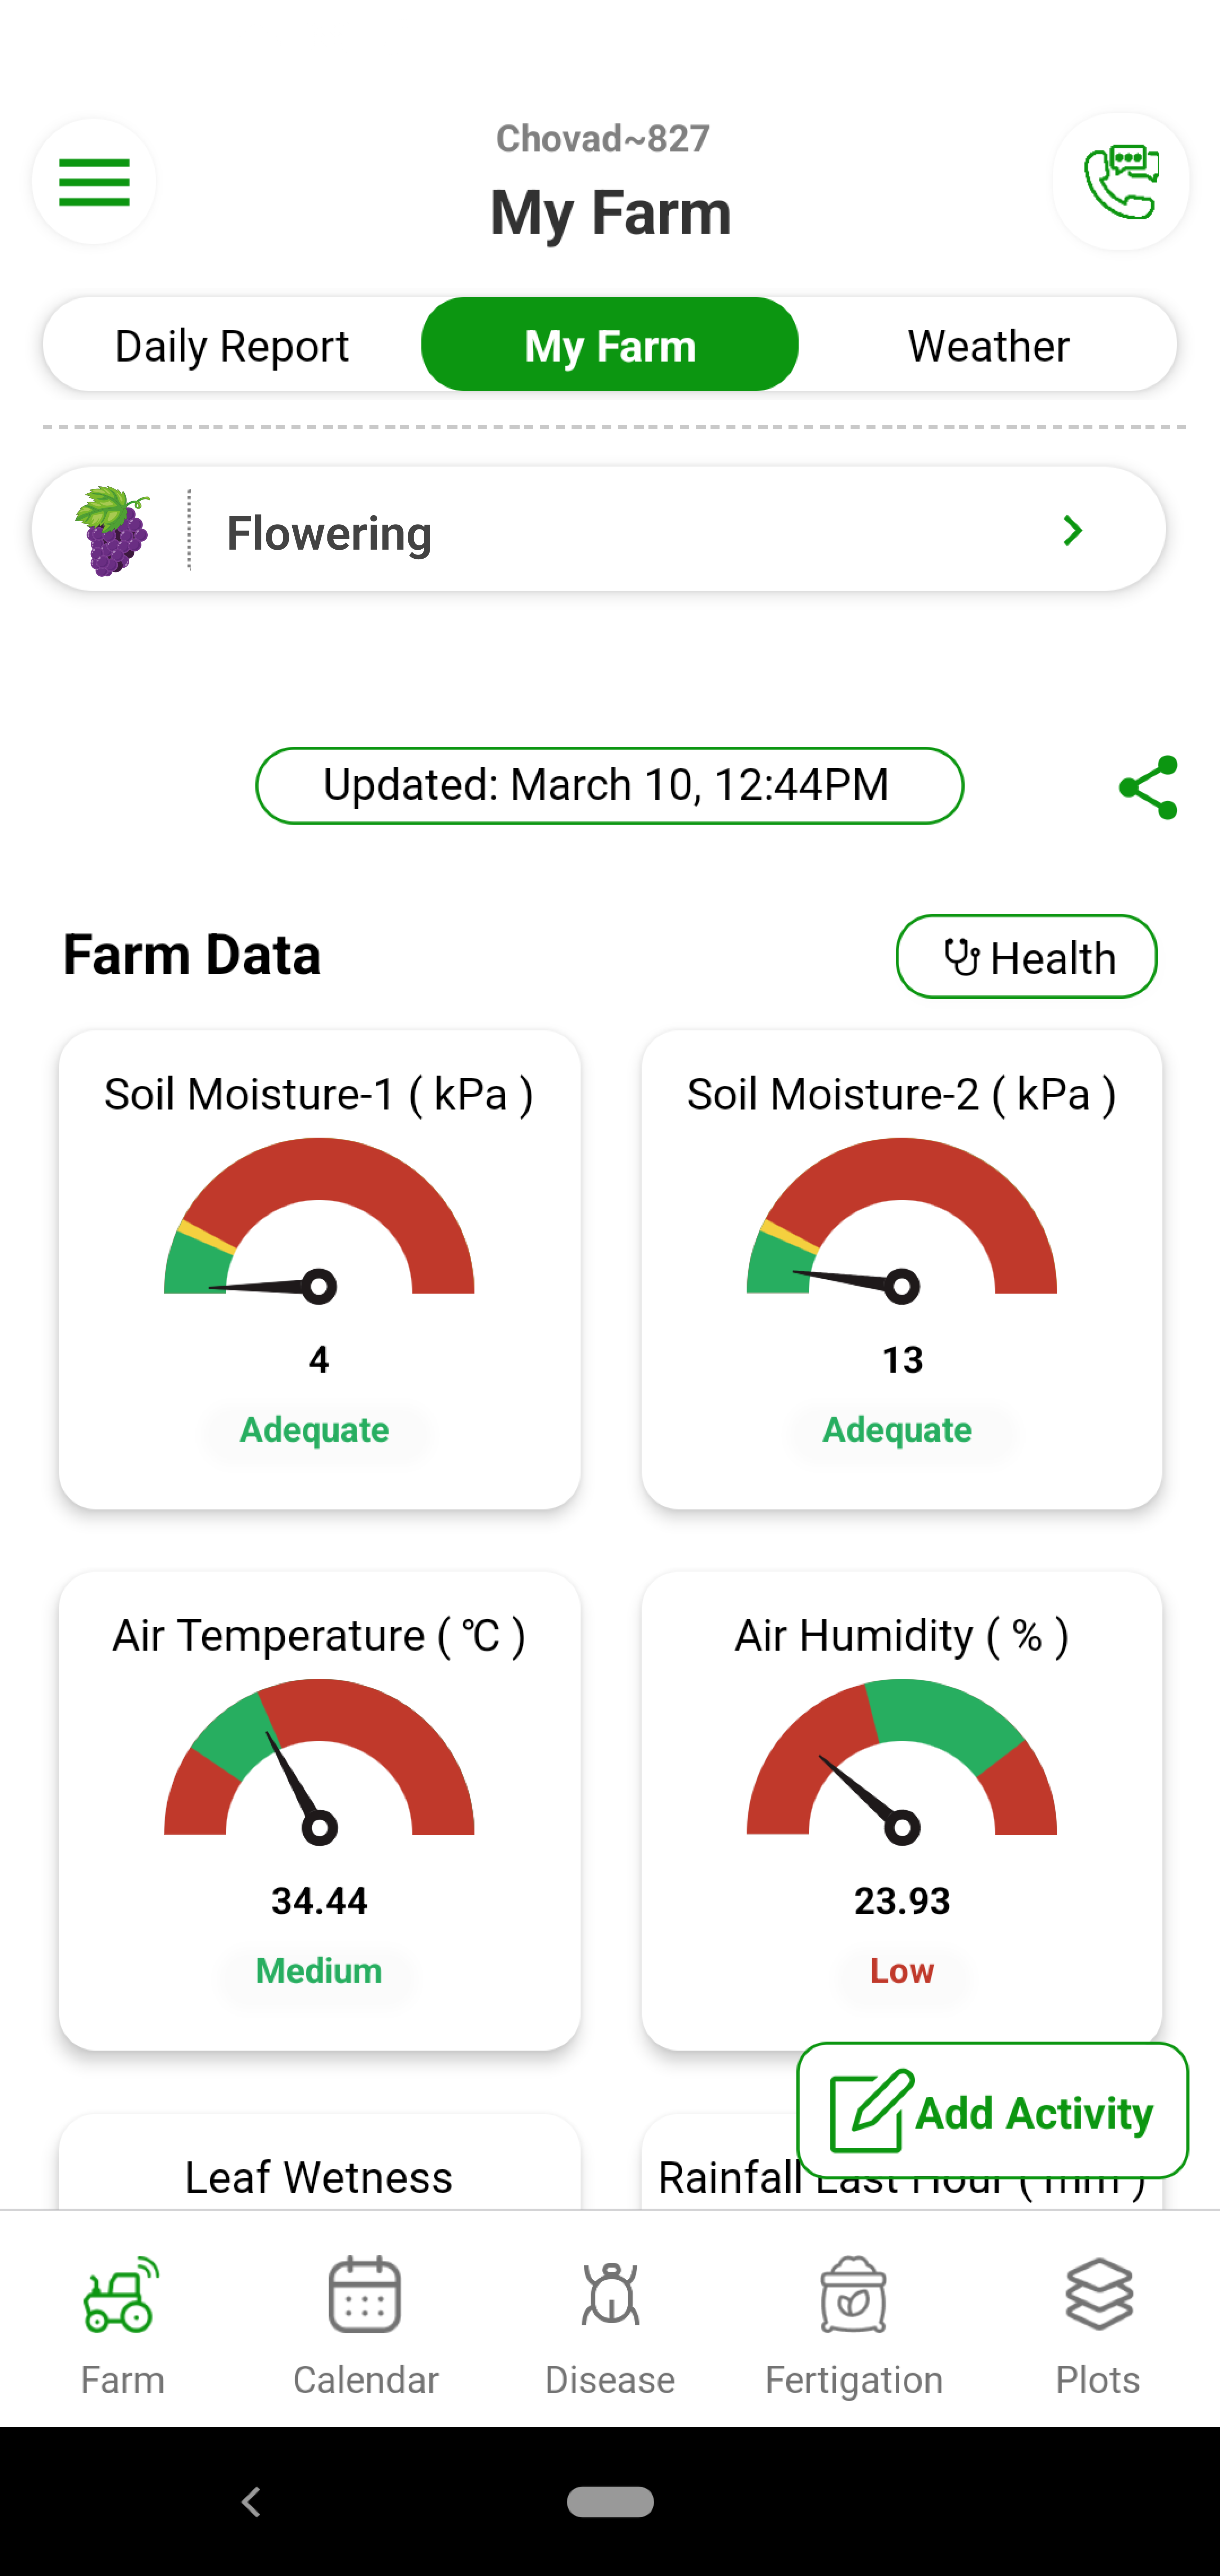 Fyllo device installed at your grape orchard monitors your farm 24*7 and captures 12 critical parameters in real time